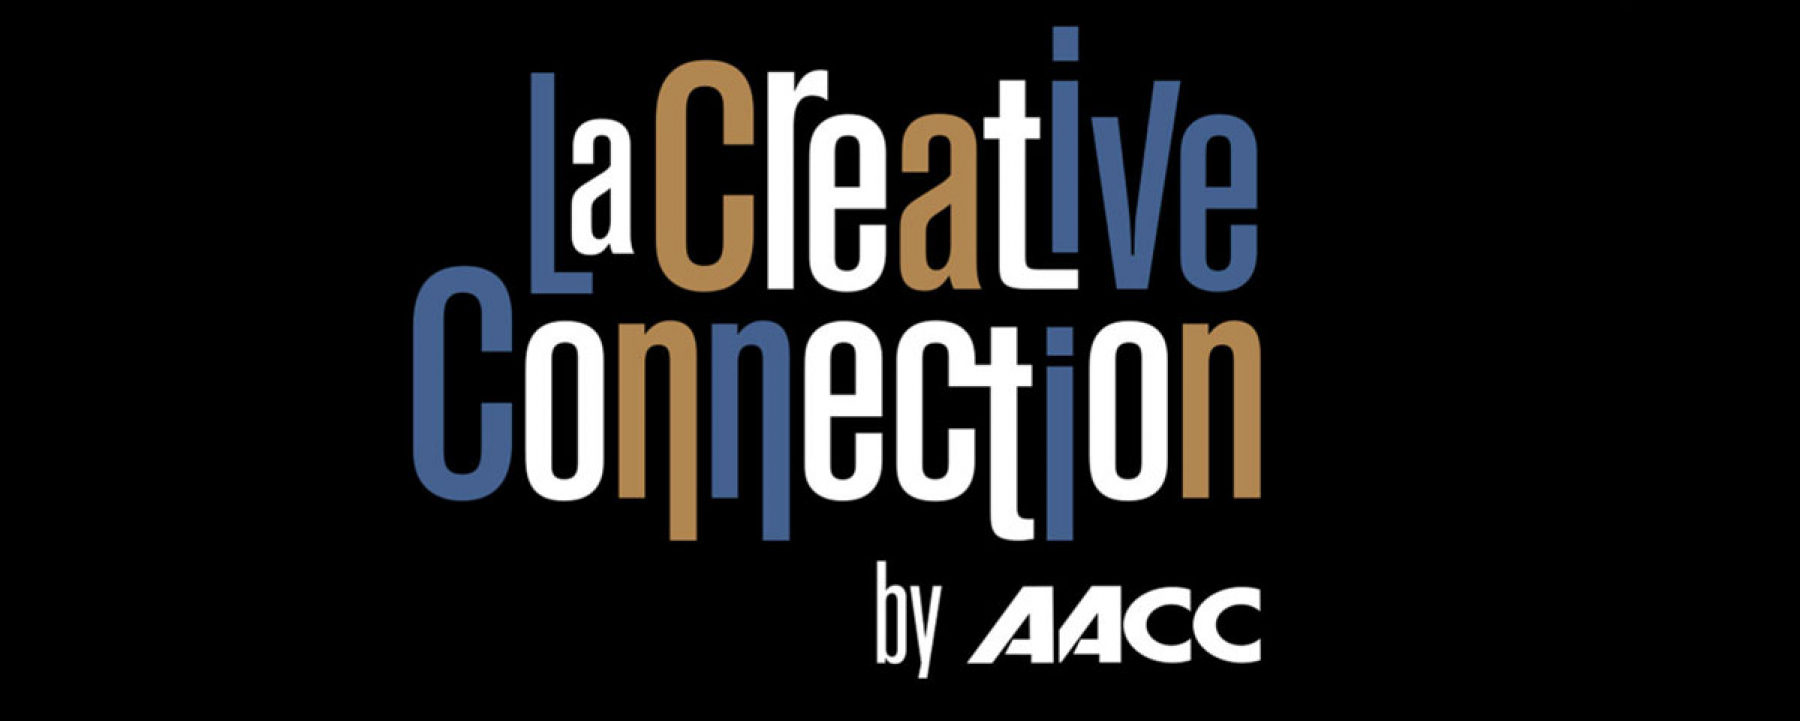 La Creative Connection by AACC